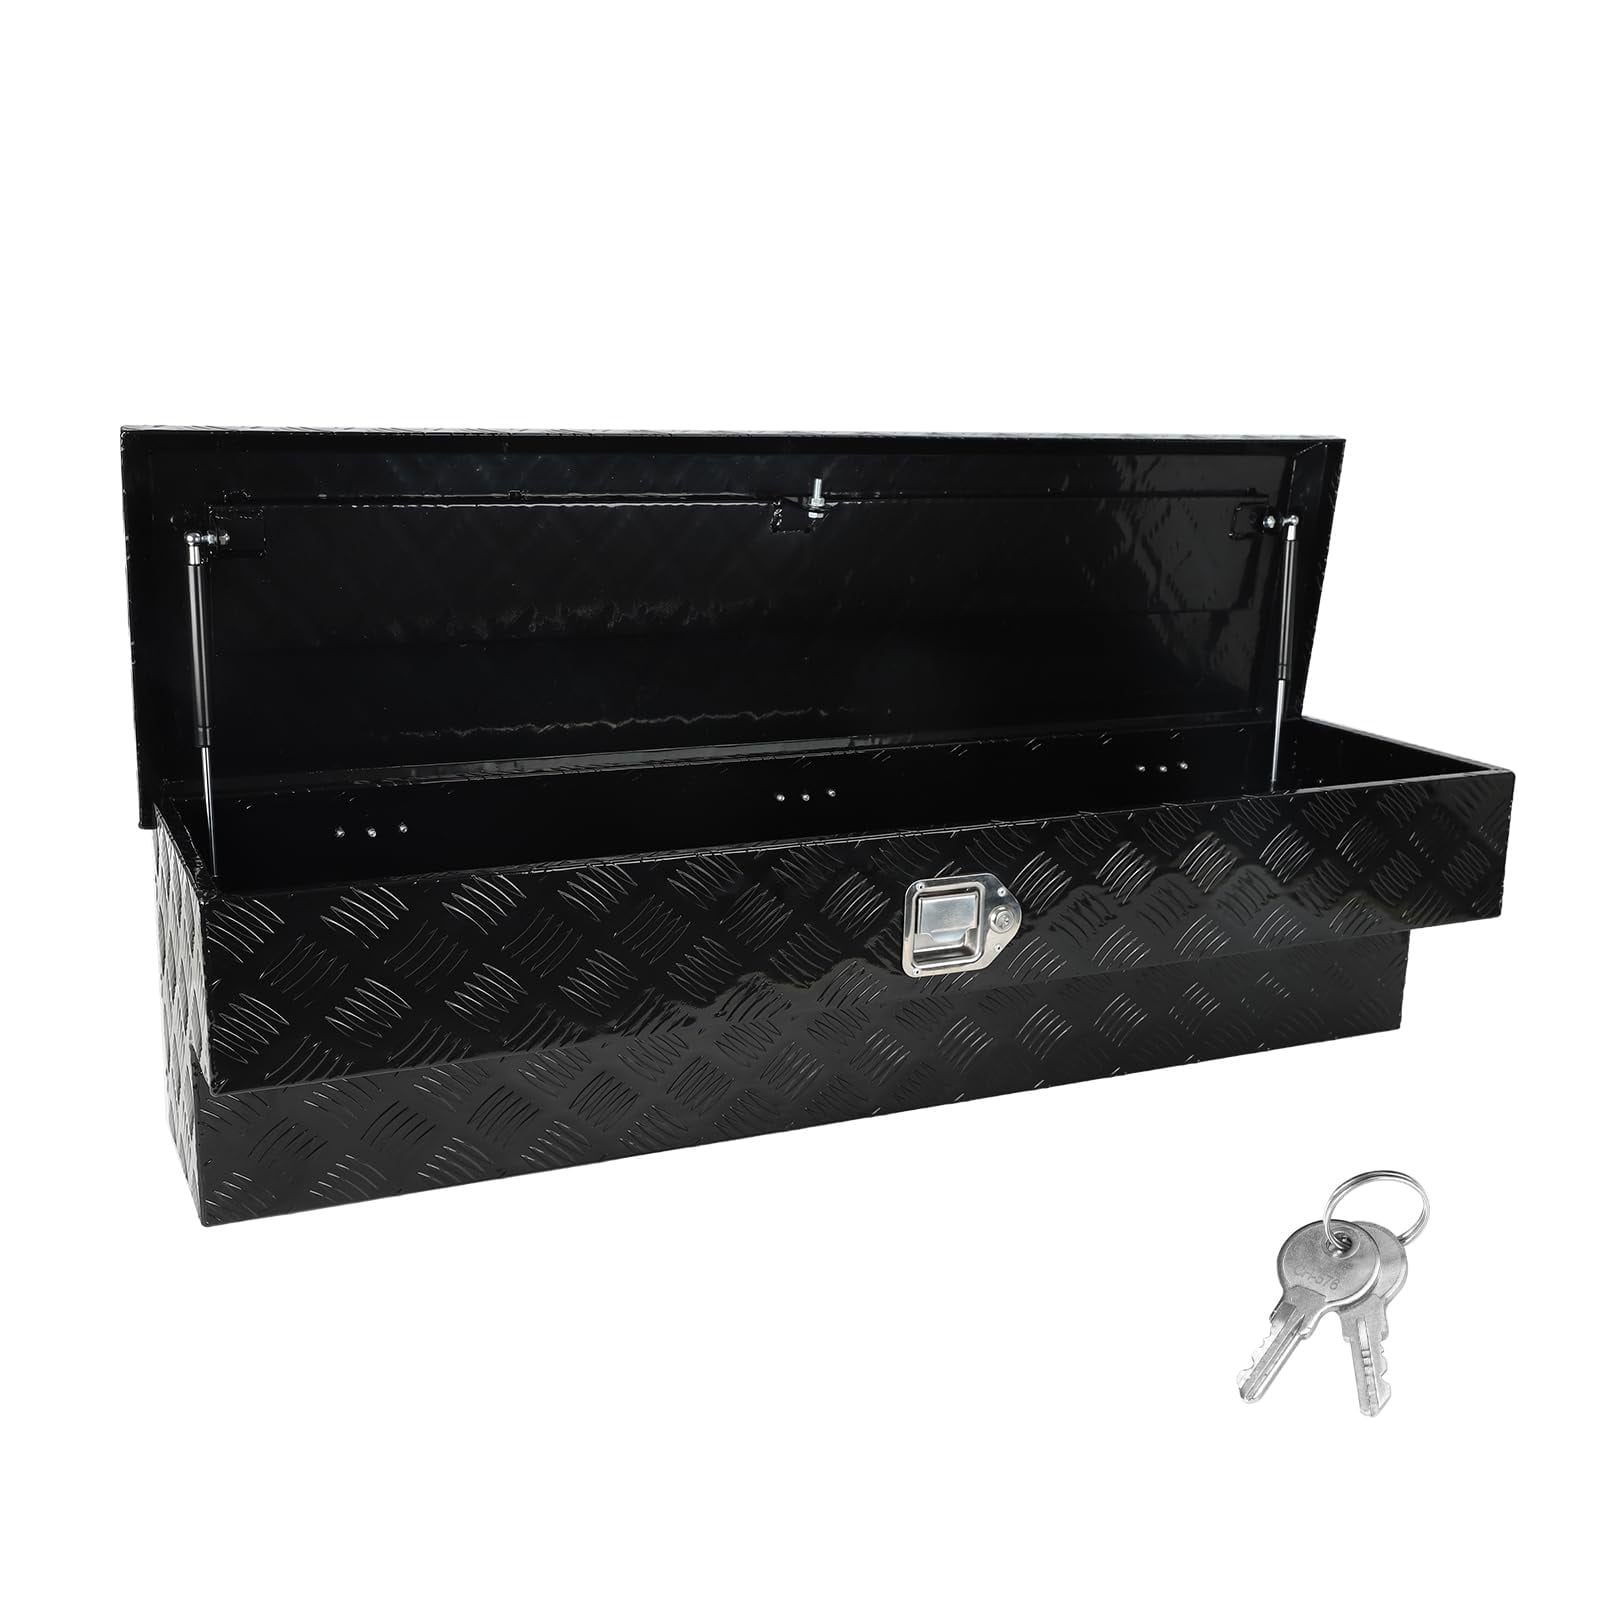 Confote 48 inch Heavy Duty Aluminum Side Mount Tool Box, 5 Bar and